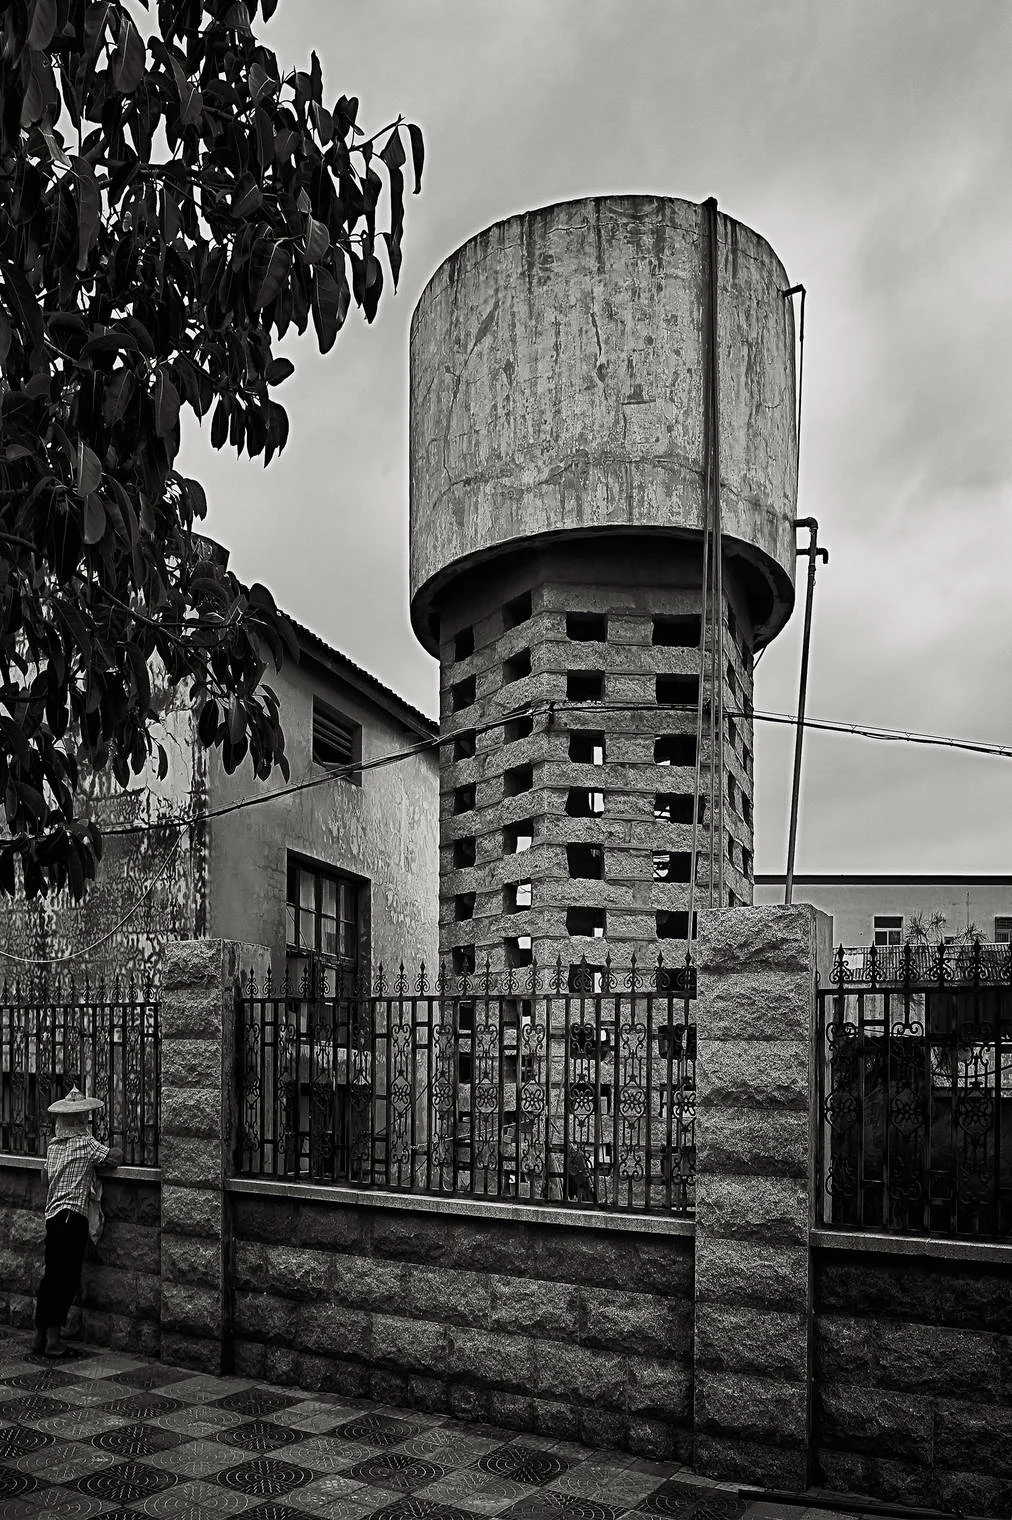 water tower with granite base